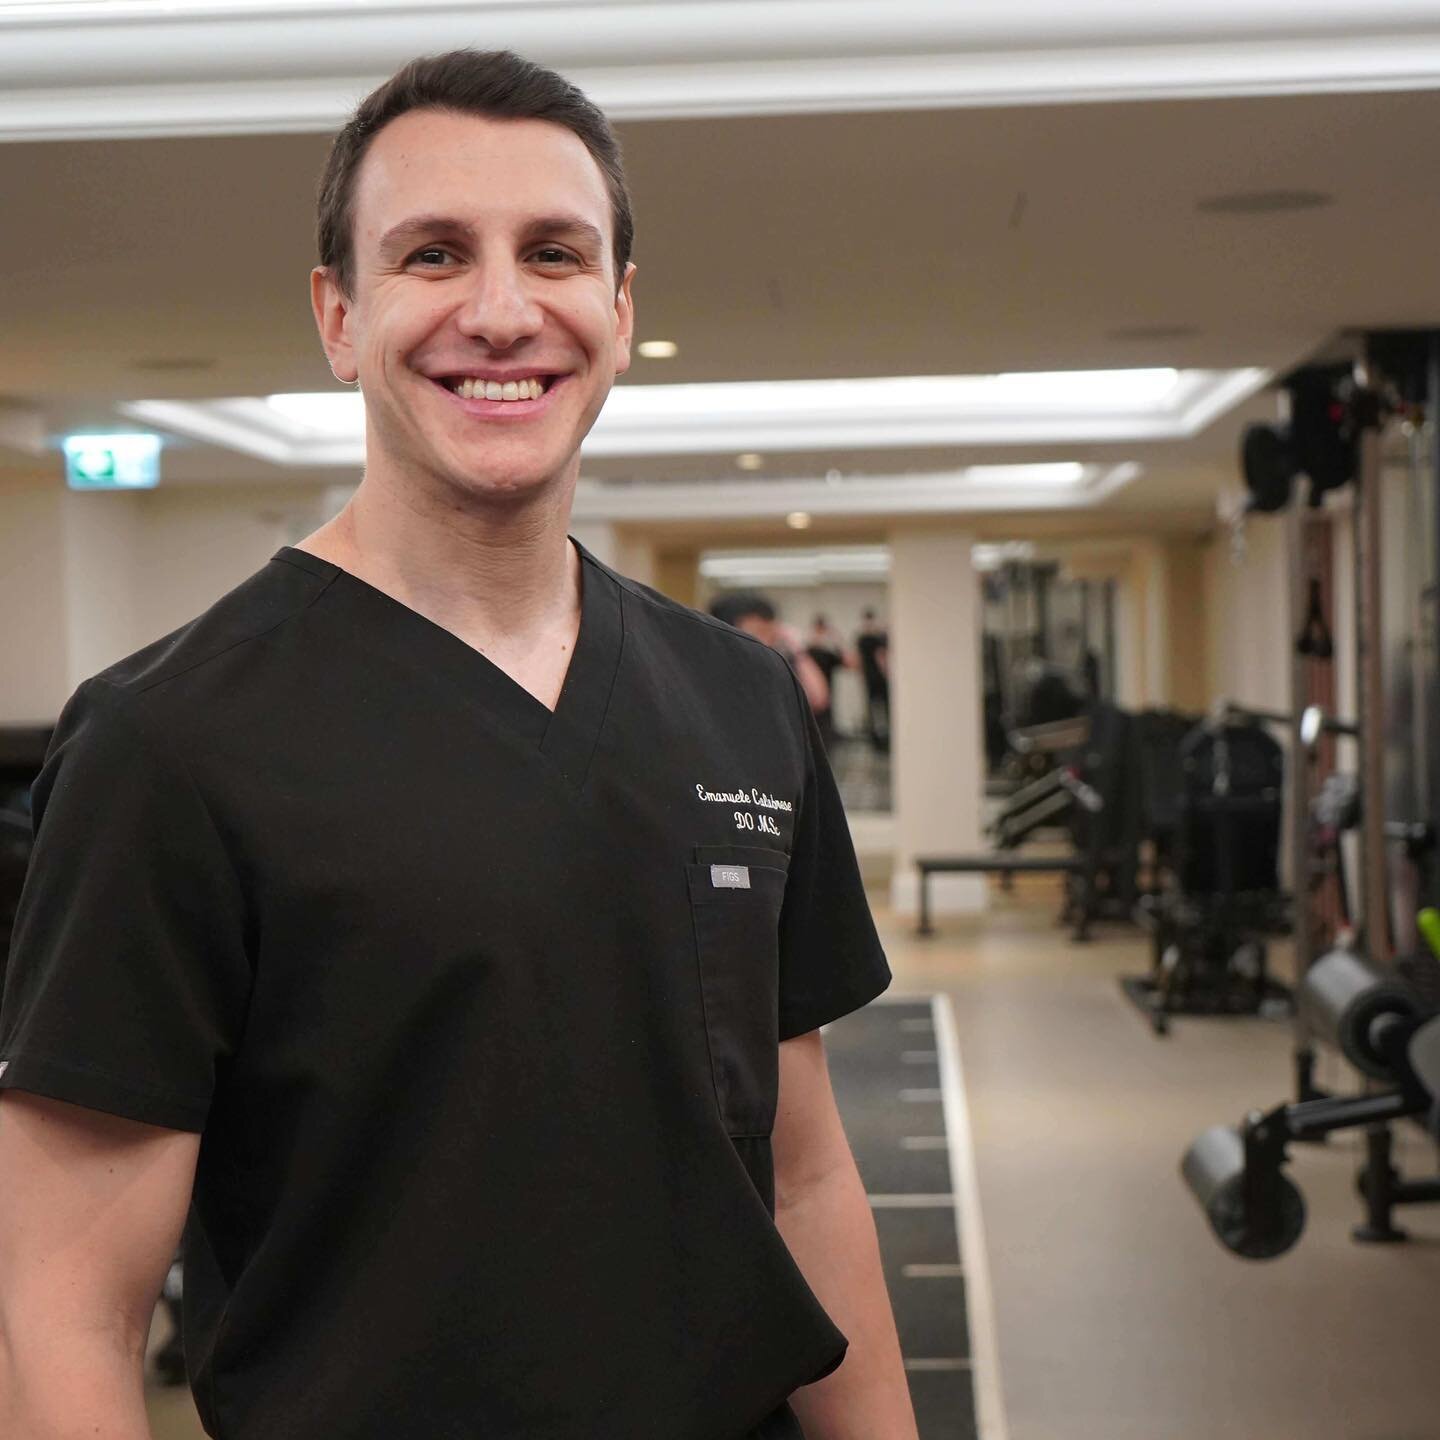 Meet our Lead Osteopath | Emanuele Calabrese

&ldquo;My motto is &ldquo;Everybody is different and therefore has to be treated differently&rdquo;. For this reason, tailored treatment plans in medicine will always be more effective than those treating